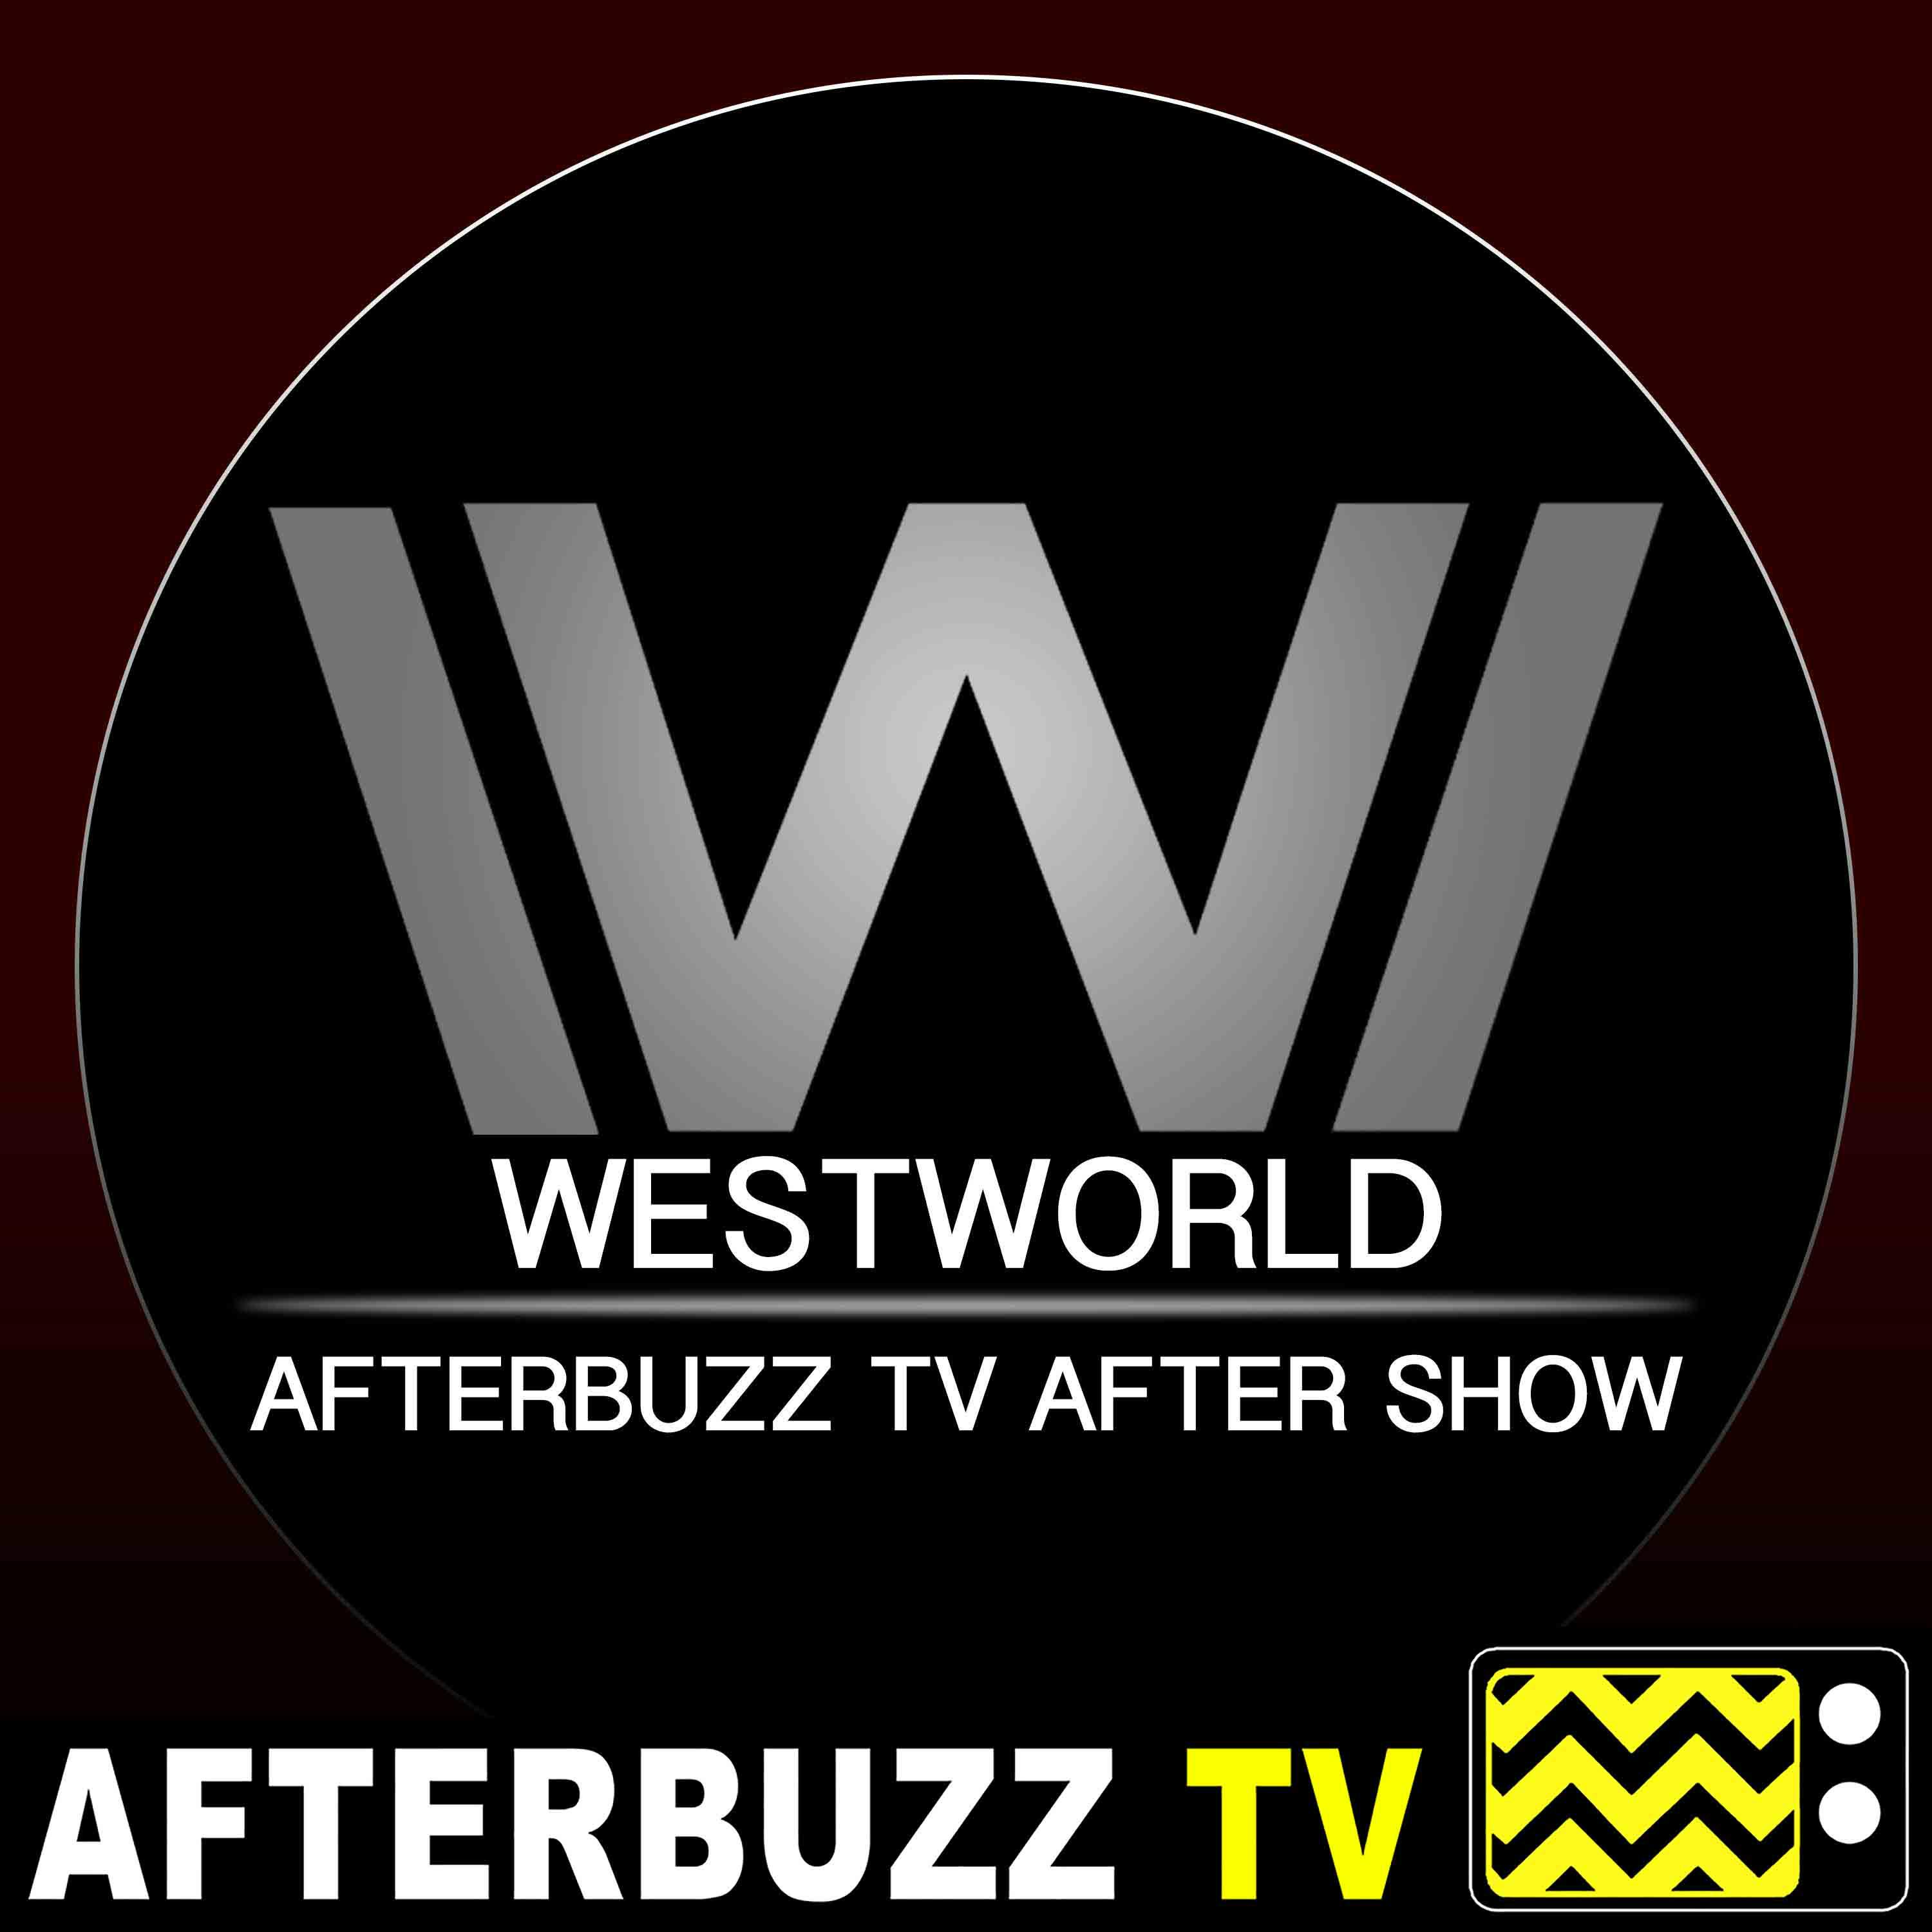 This Week We See Westworld Through a Whole New Filter - S3 E5 'Westworld' After Show